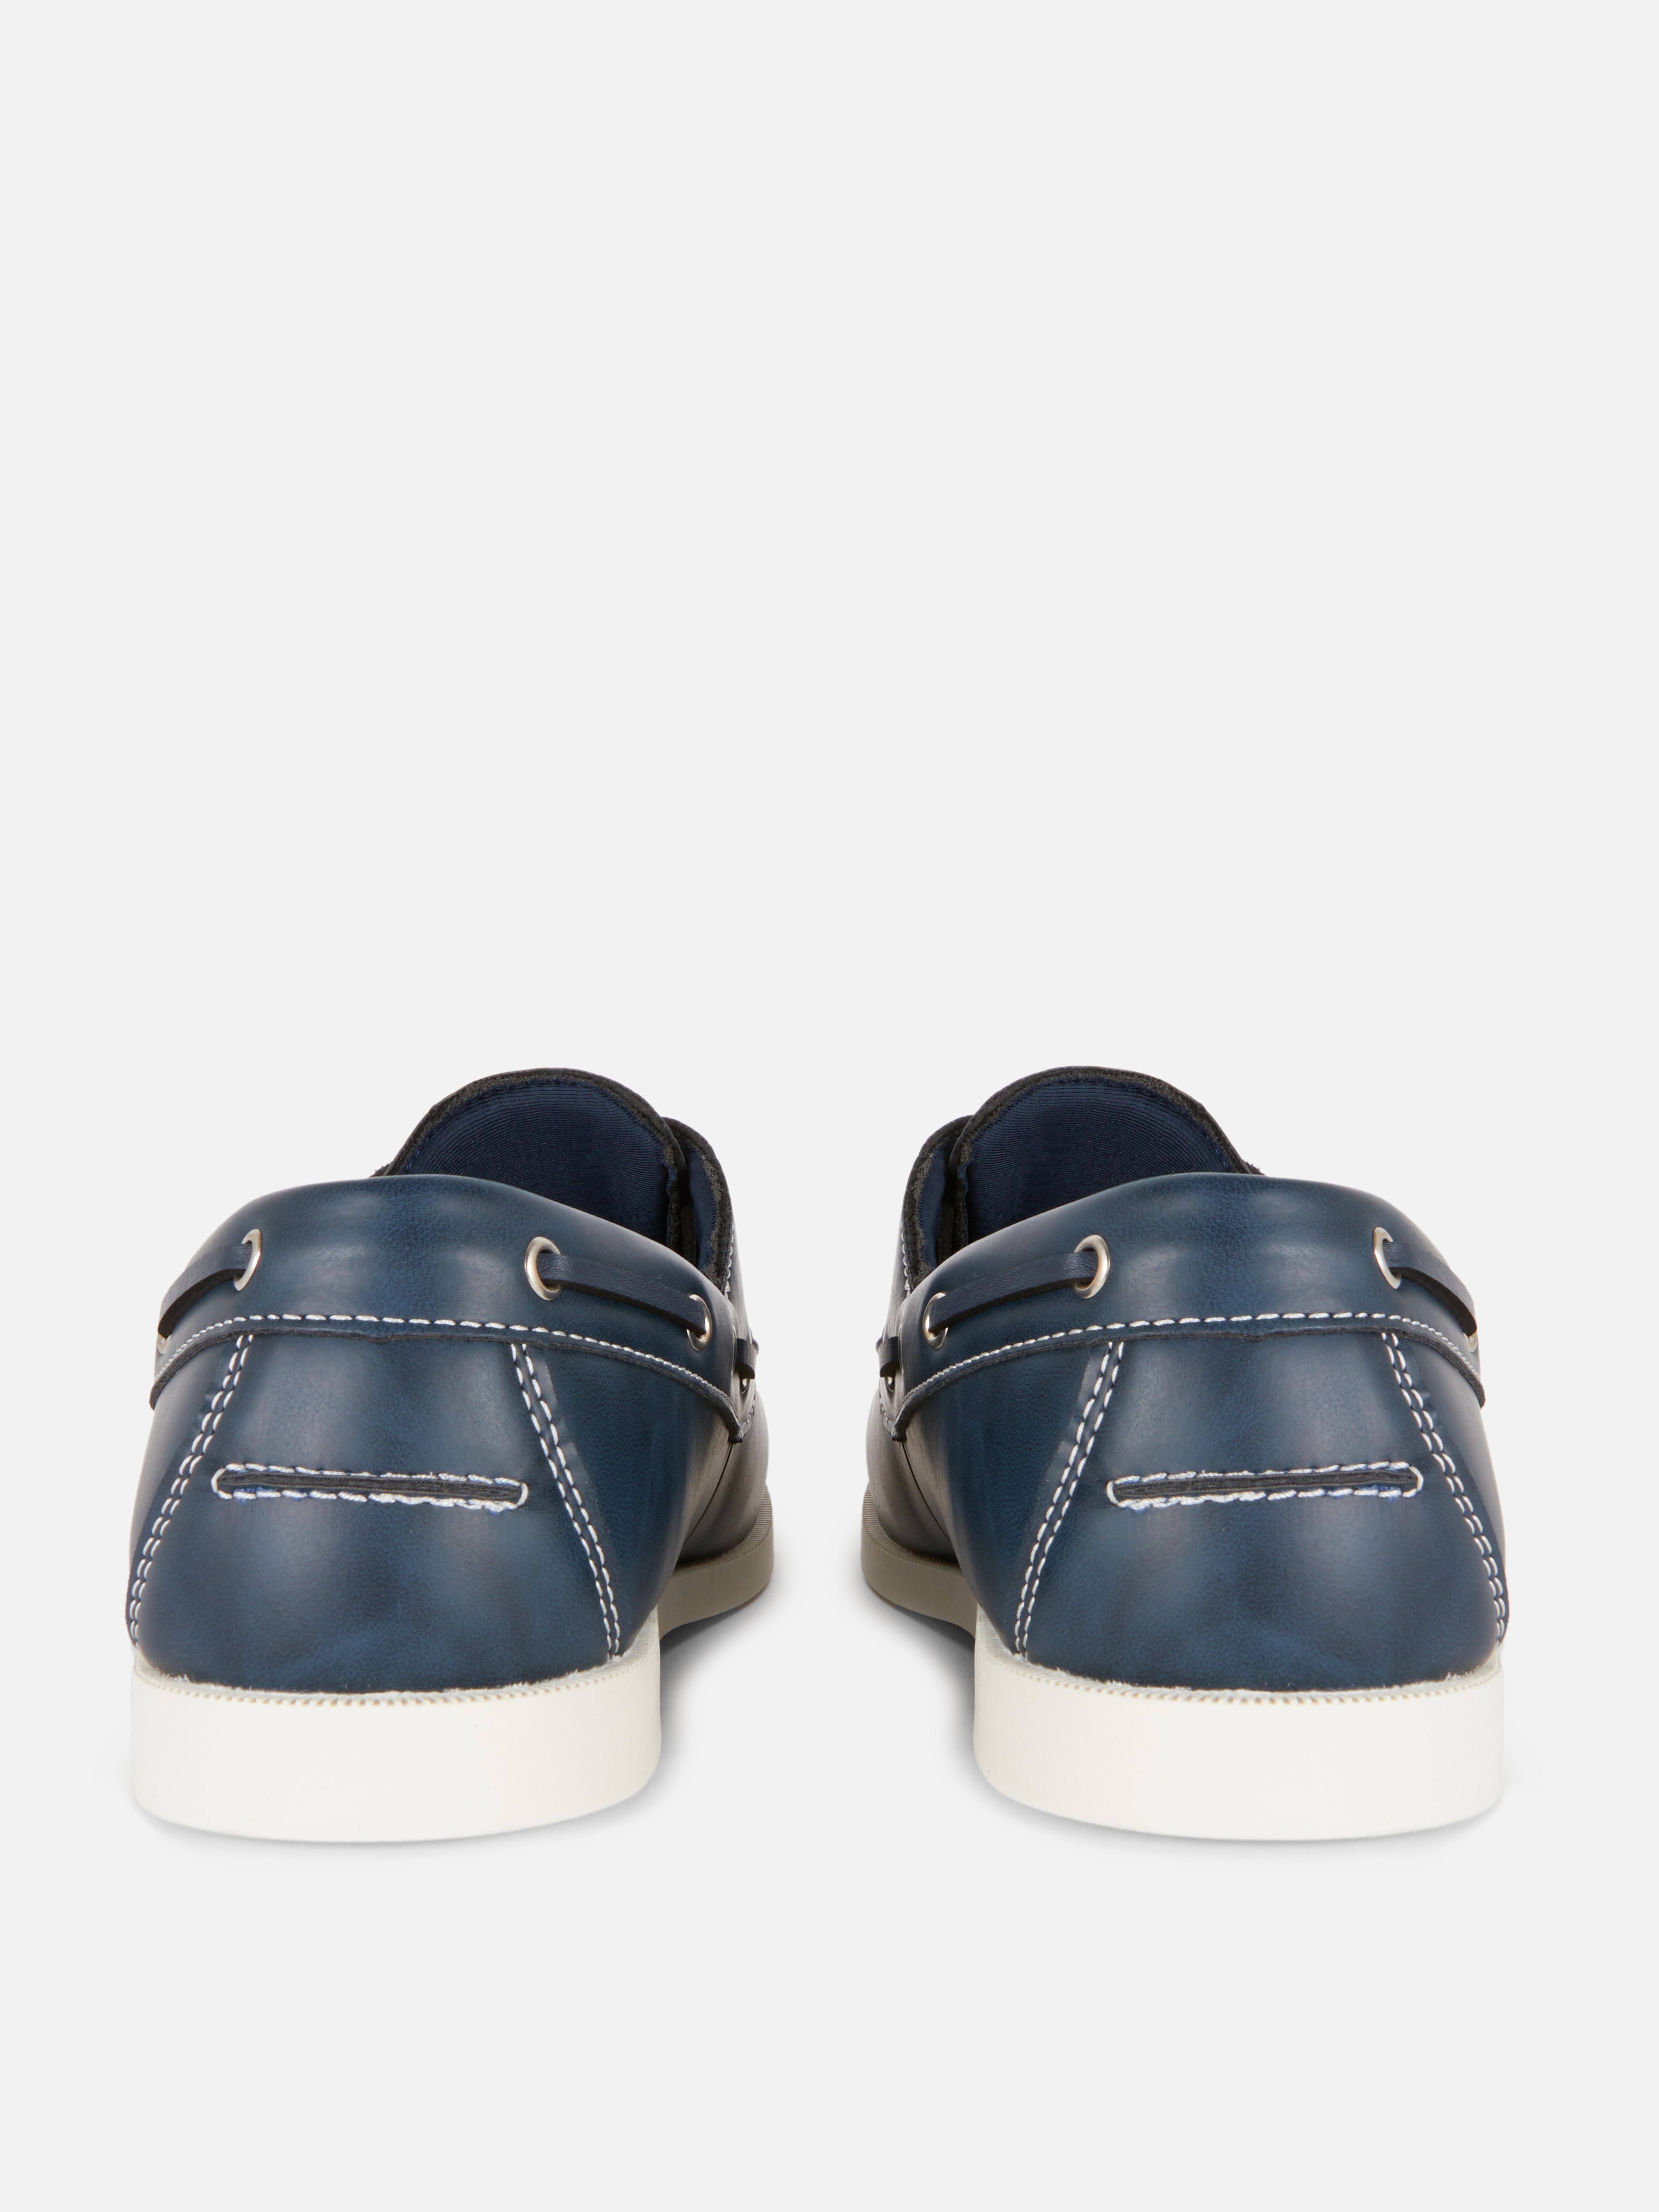 Men's Navy Classic Boat Shoes | Penneys